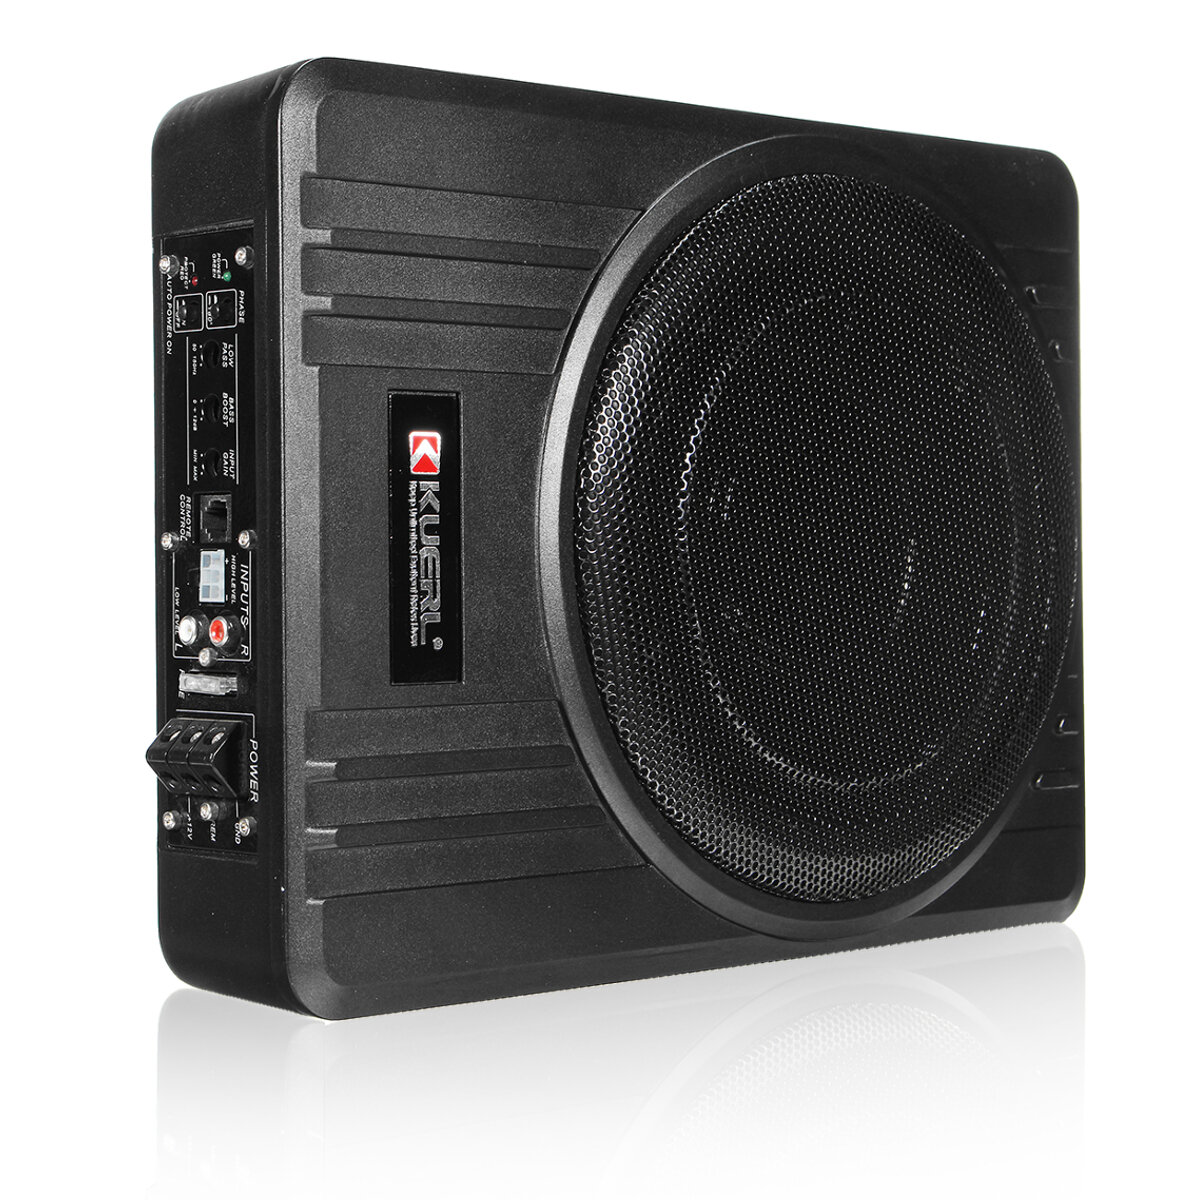 Subwoofer Amplificado Kuerl 600w 